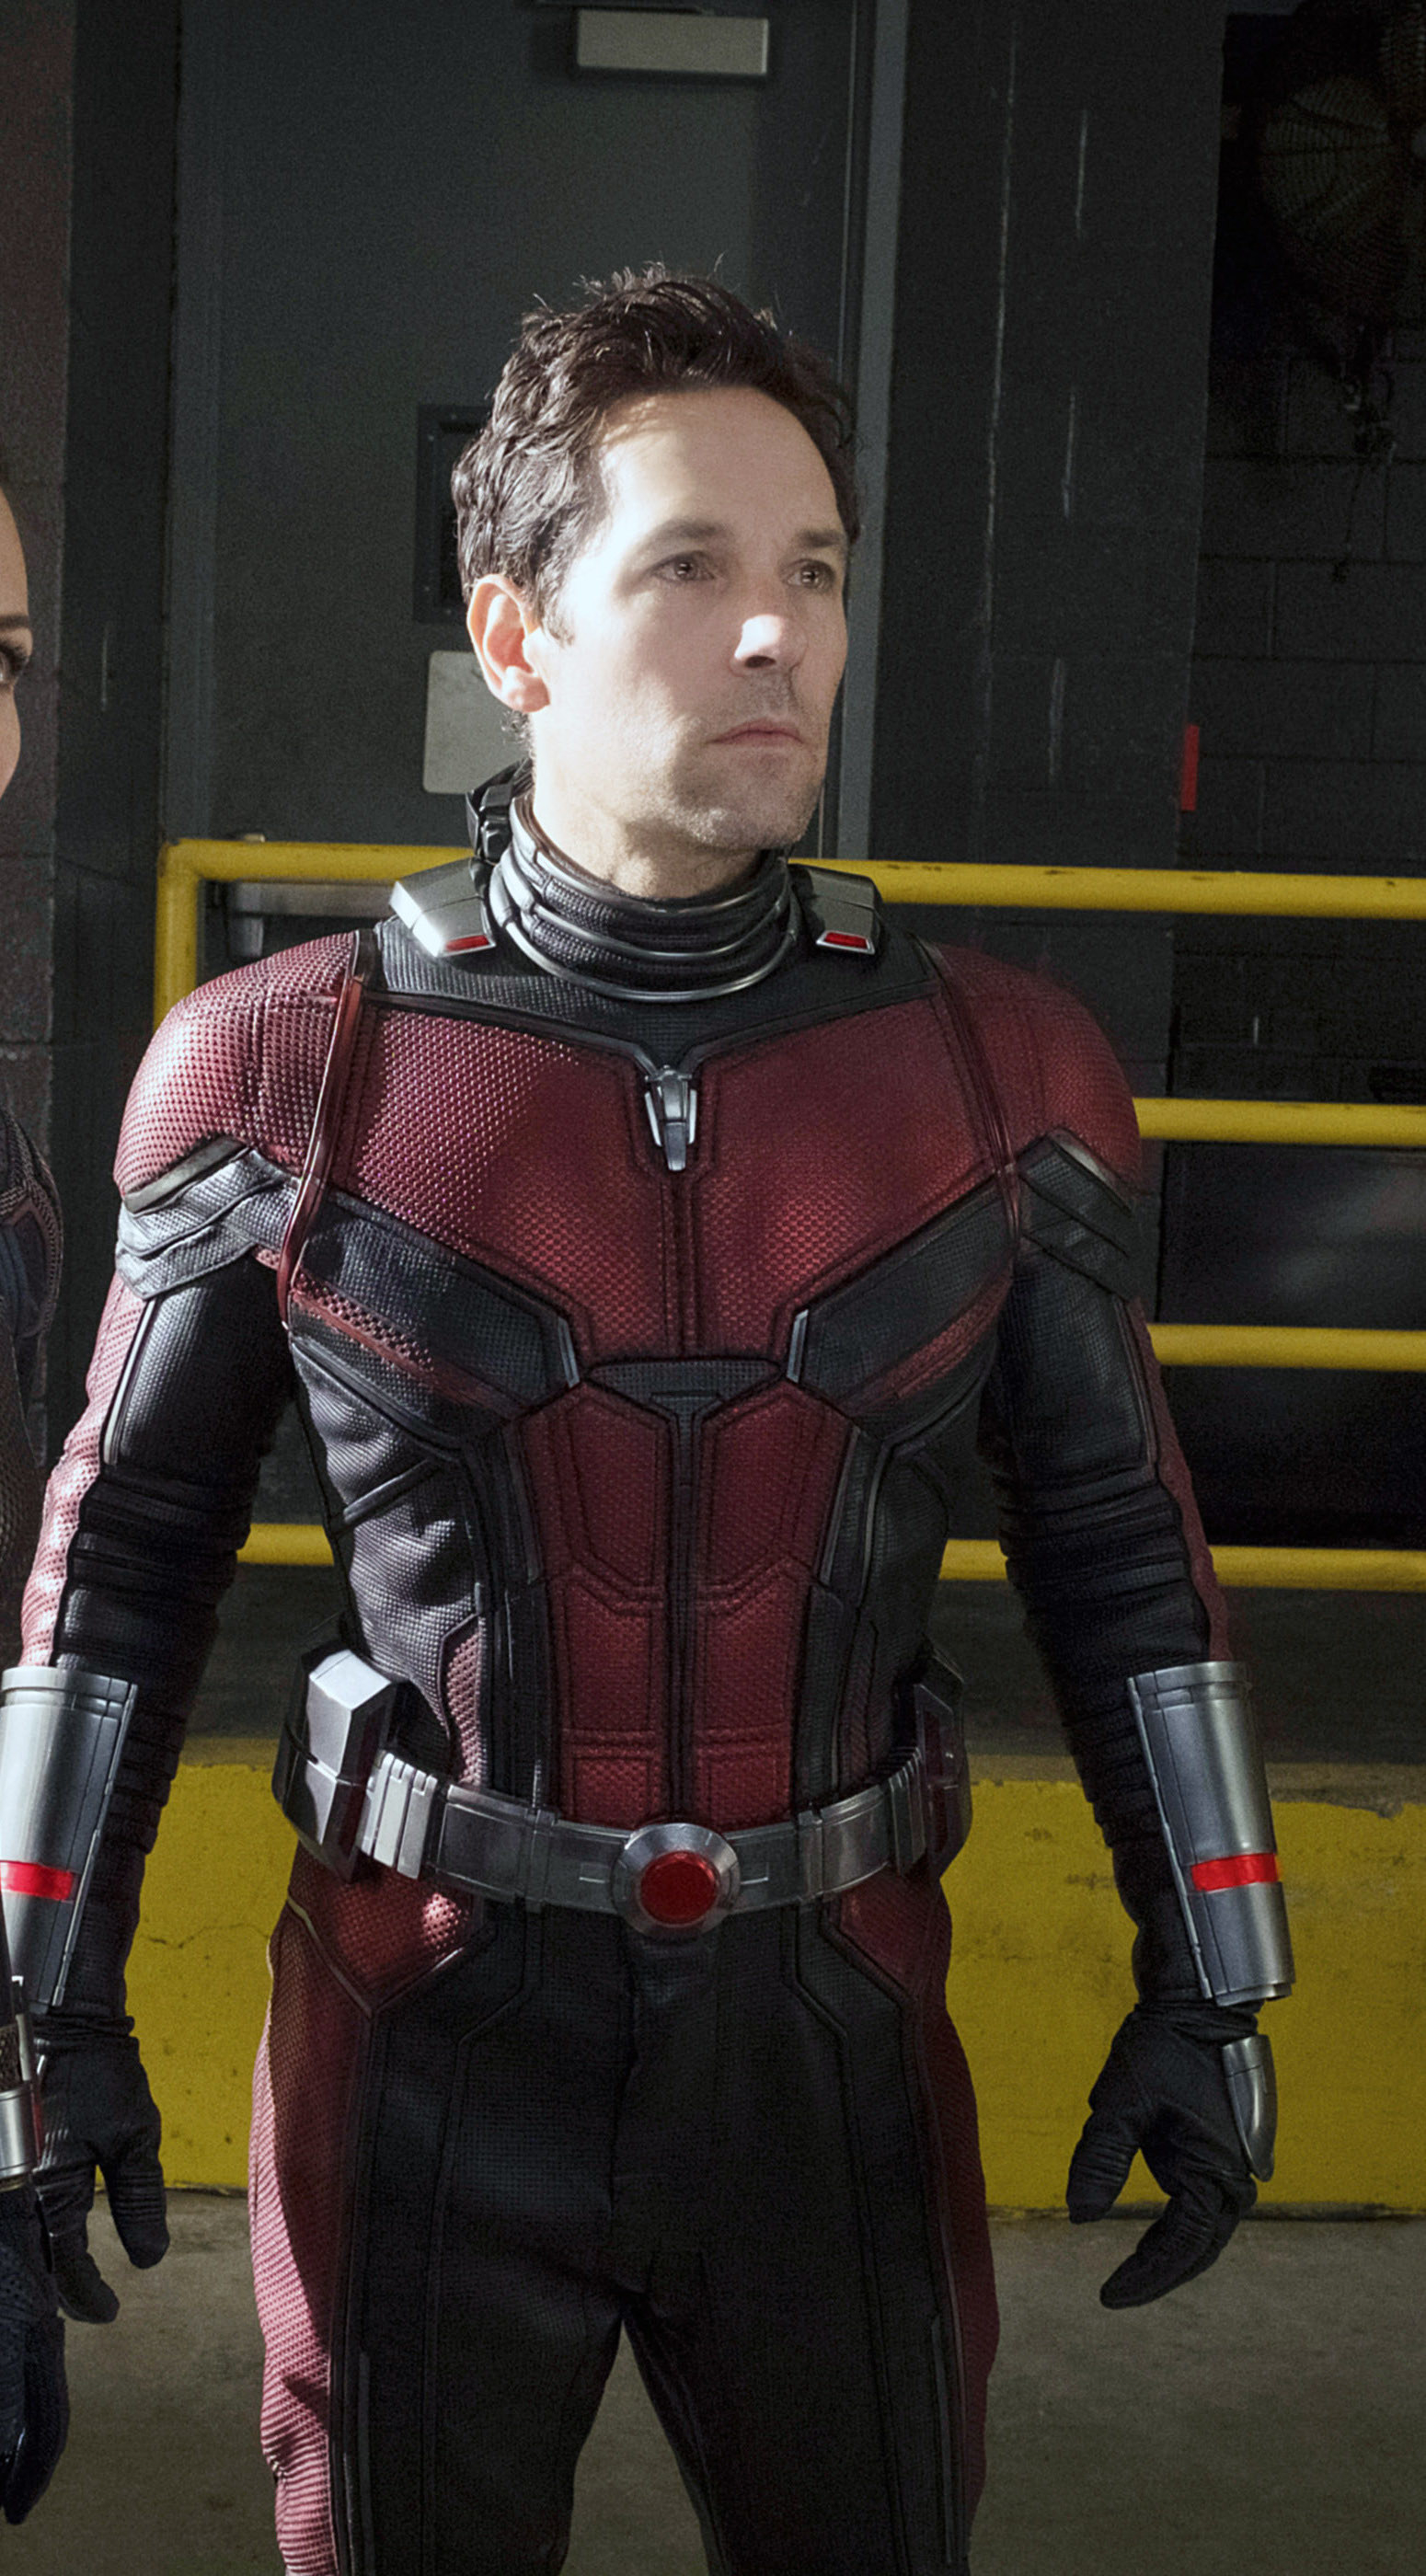 Ant Man wearing his outfit